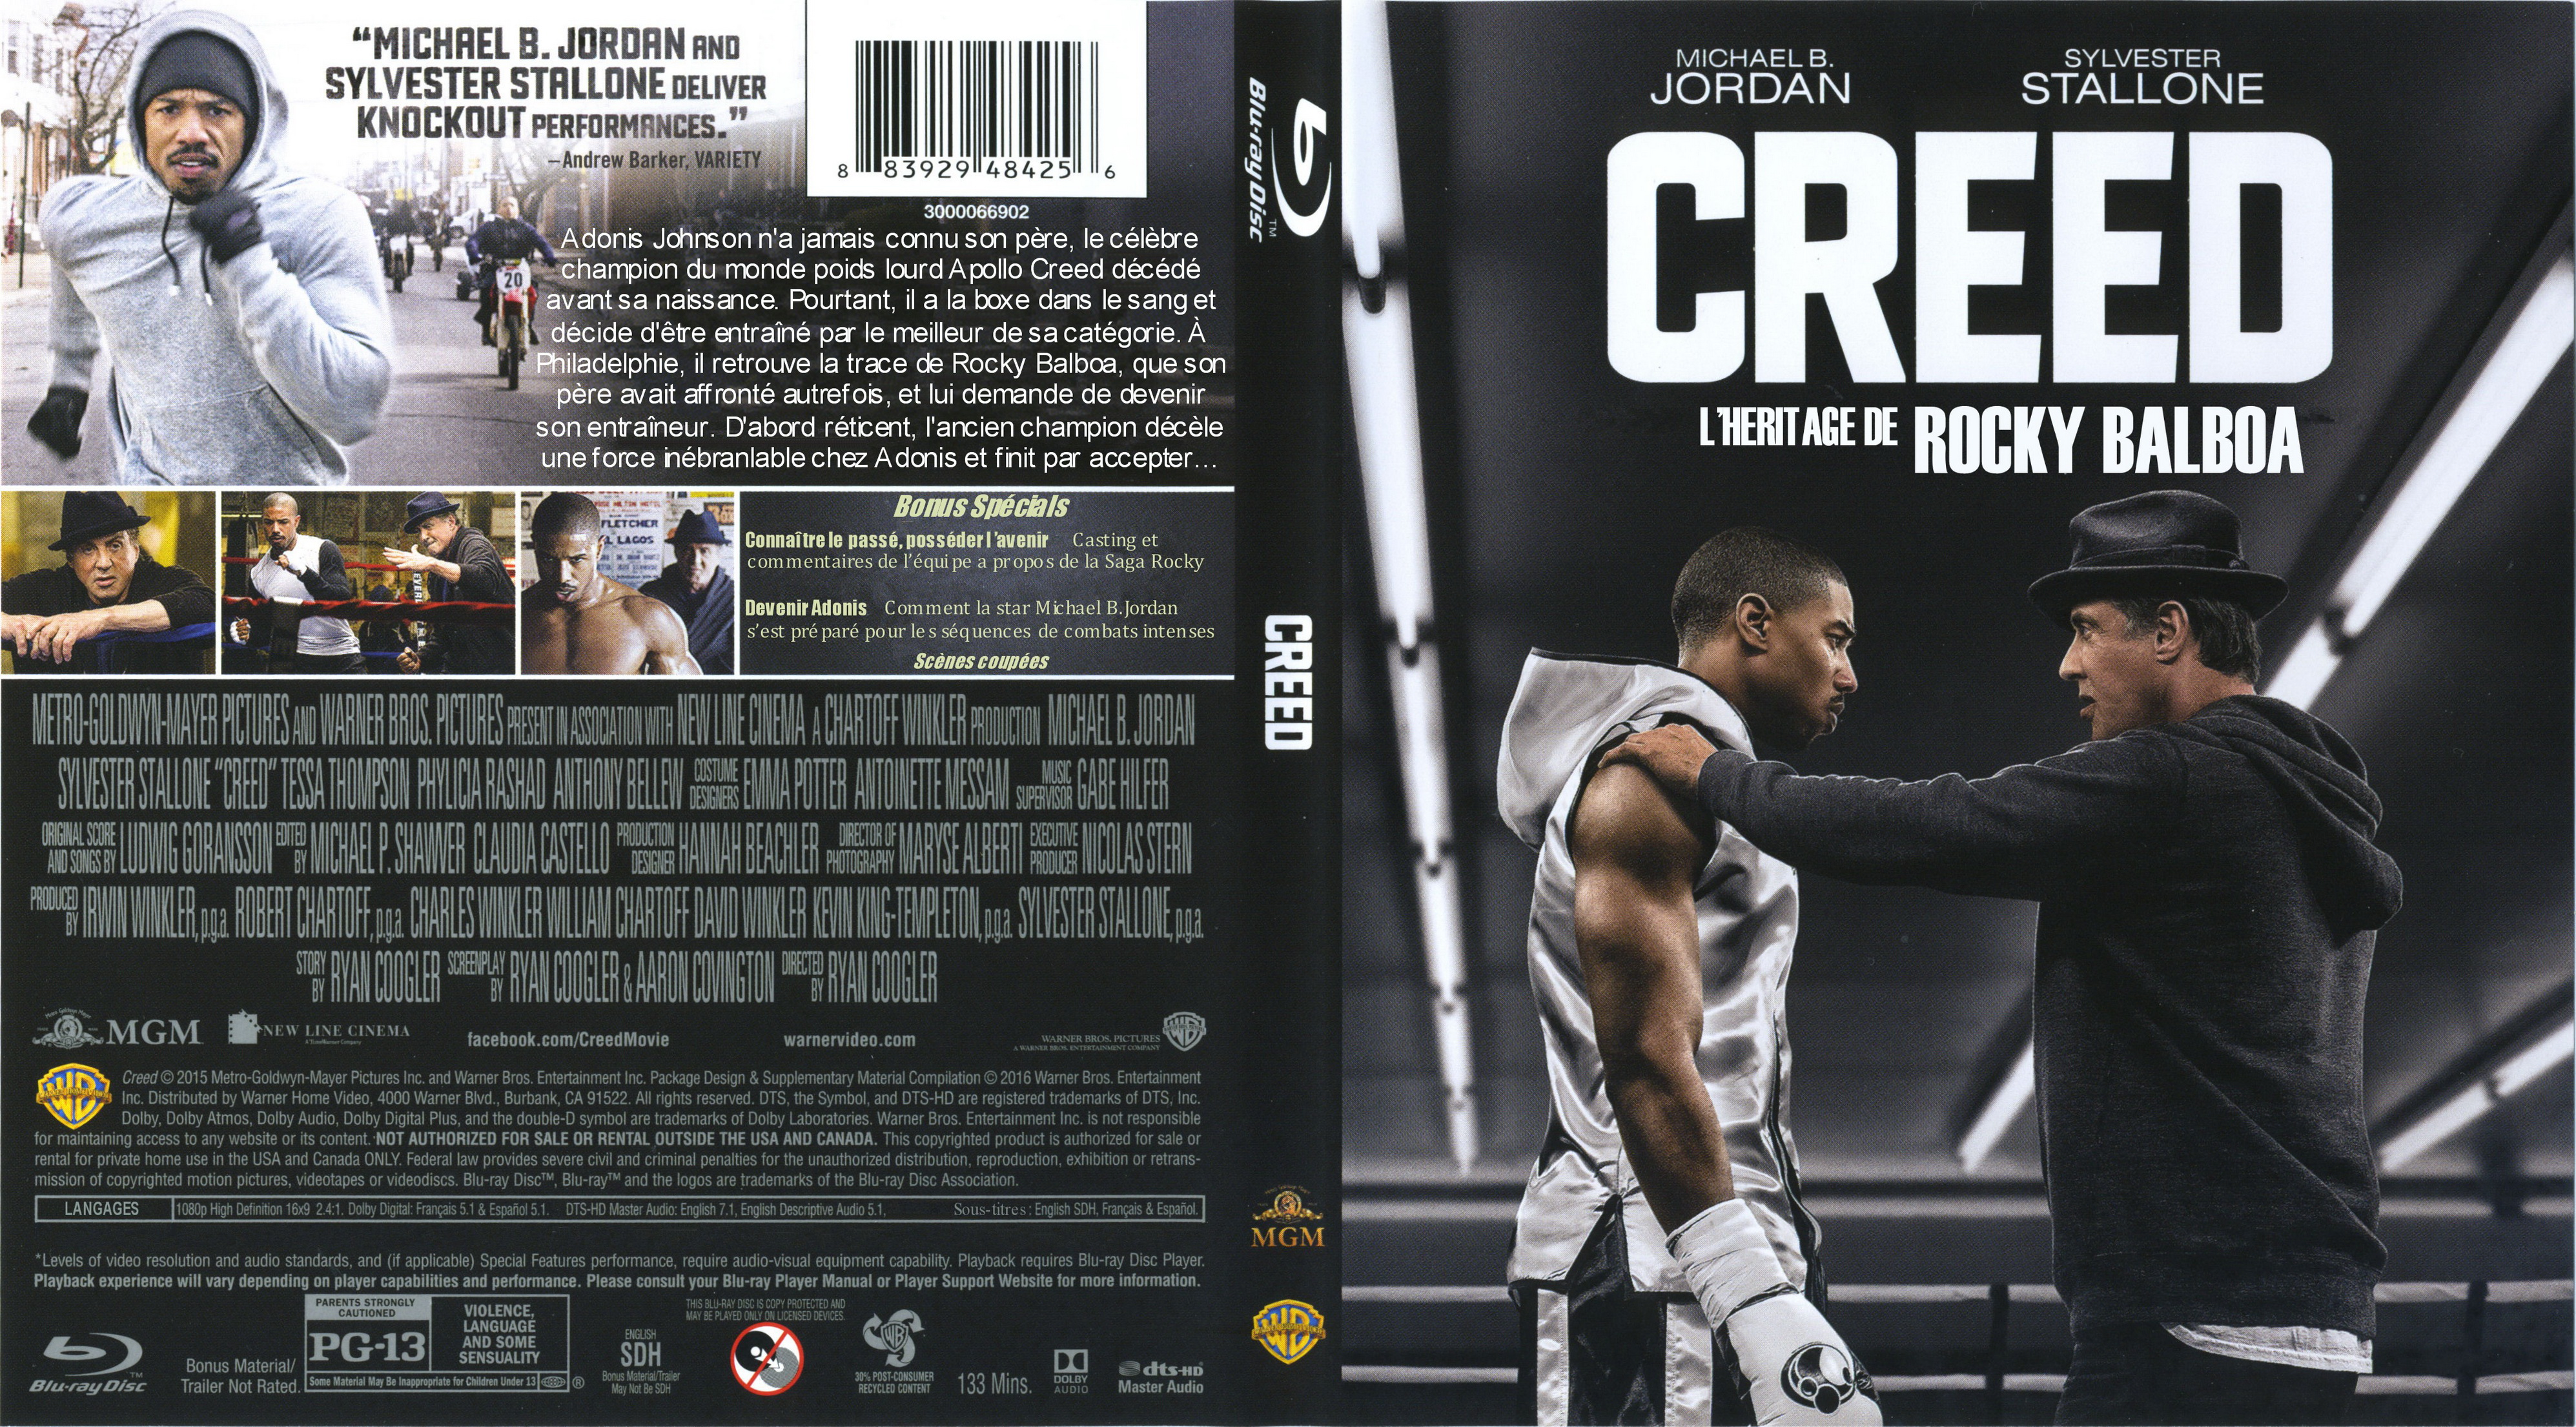 Jaquette DVD Creed (BLU-RAY)